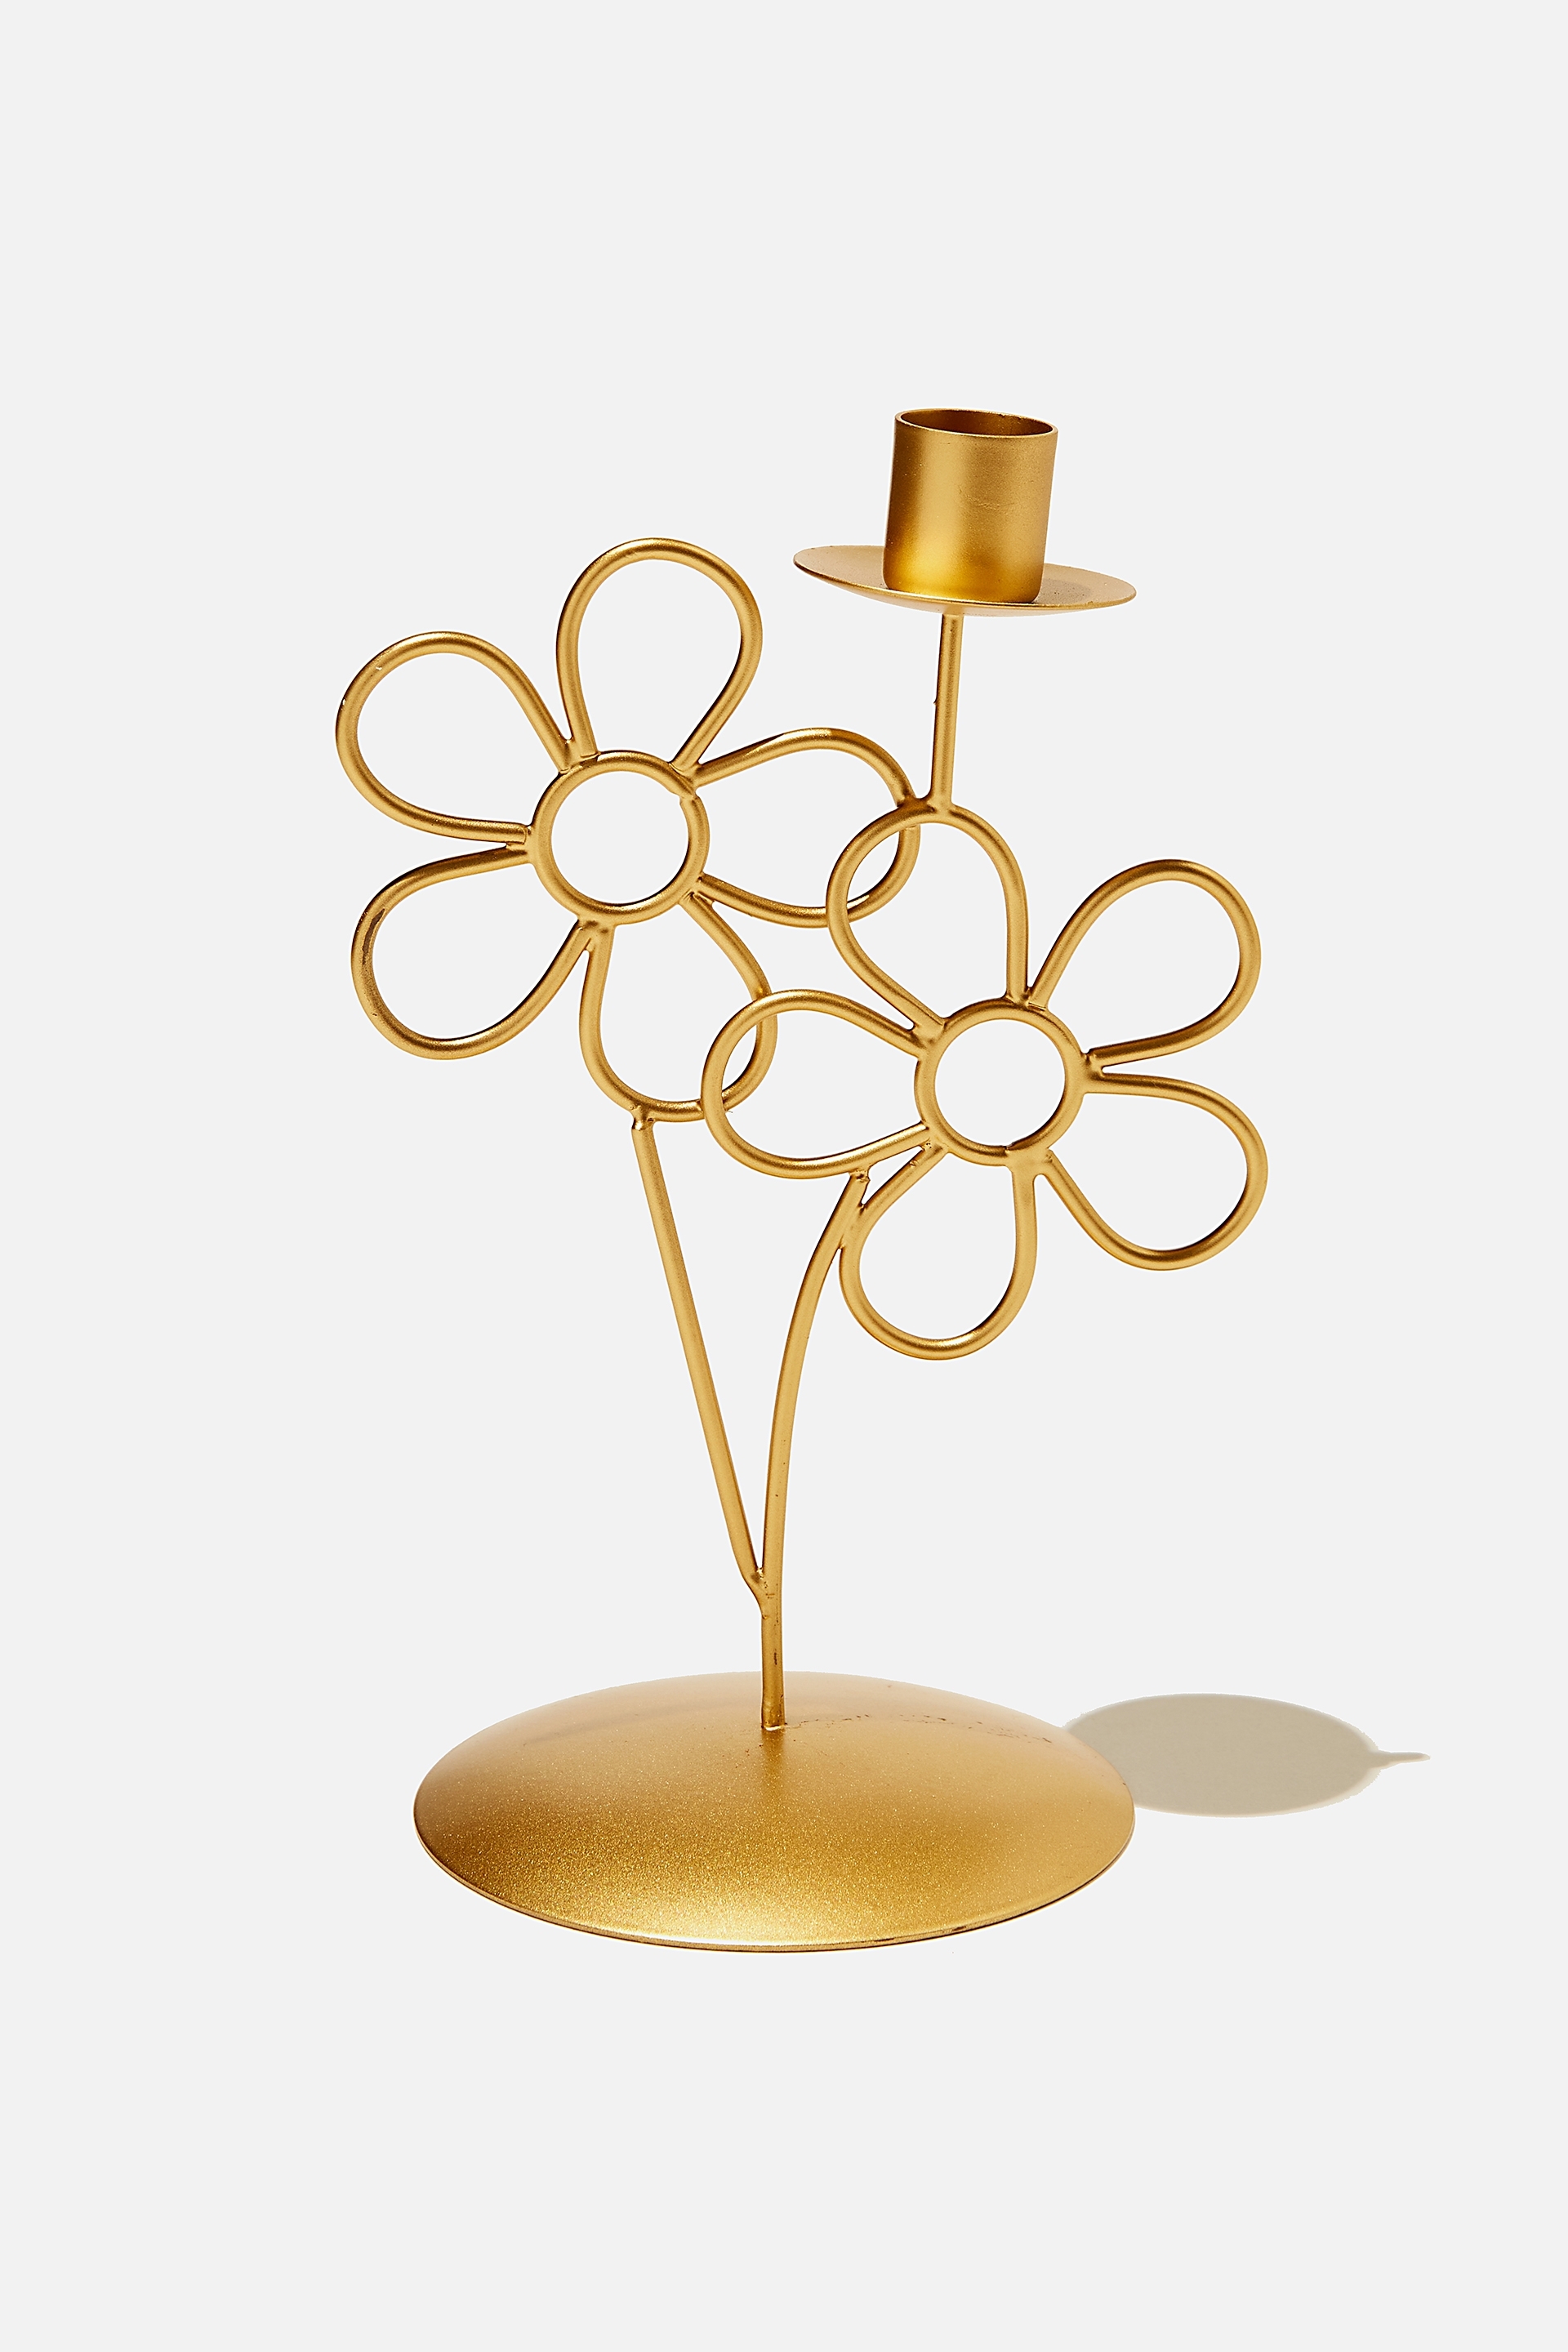 Typo - Metal Shaped Candle Holder - Gold daisies